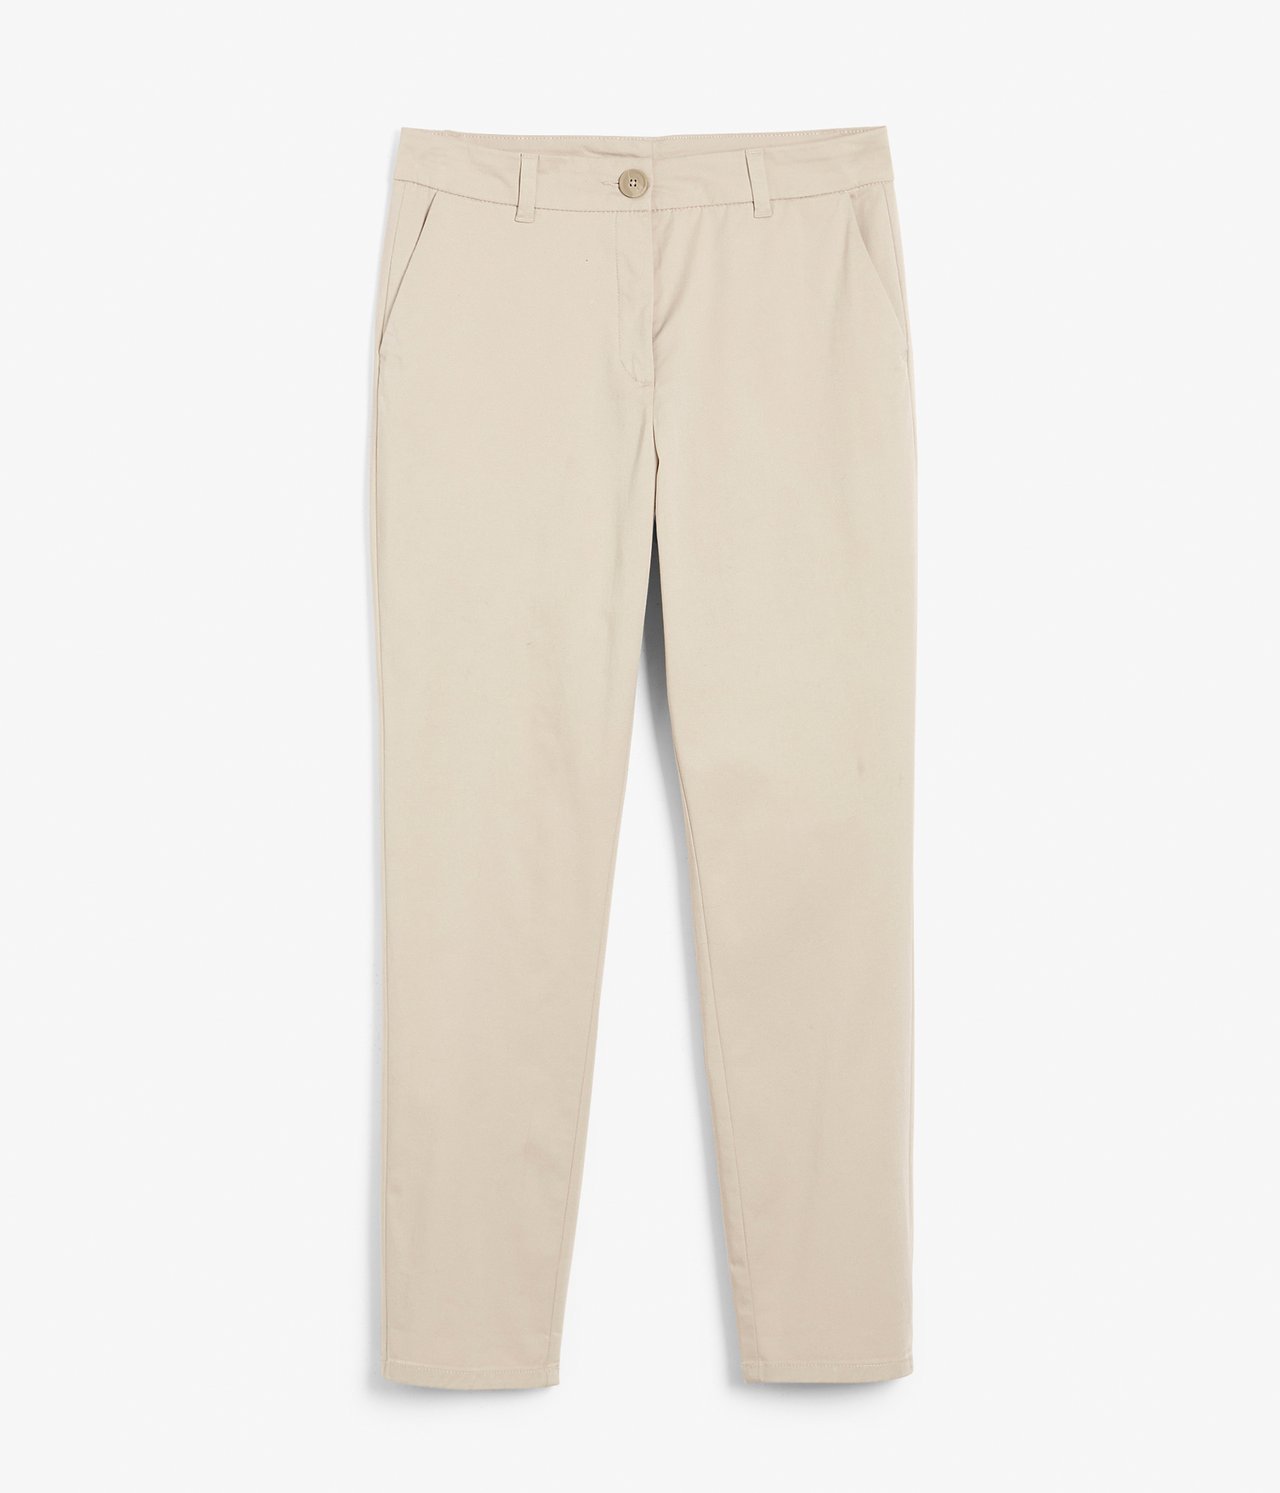 Chinos - Offwhite - 6